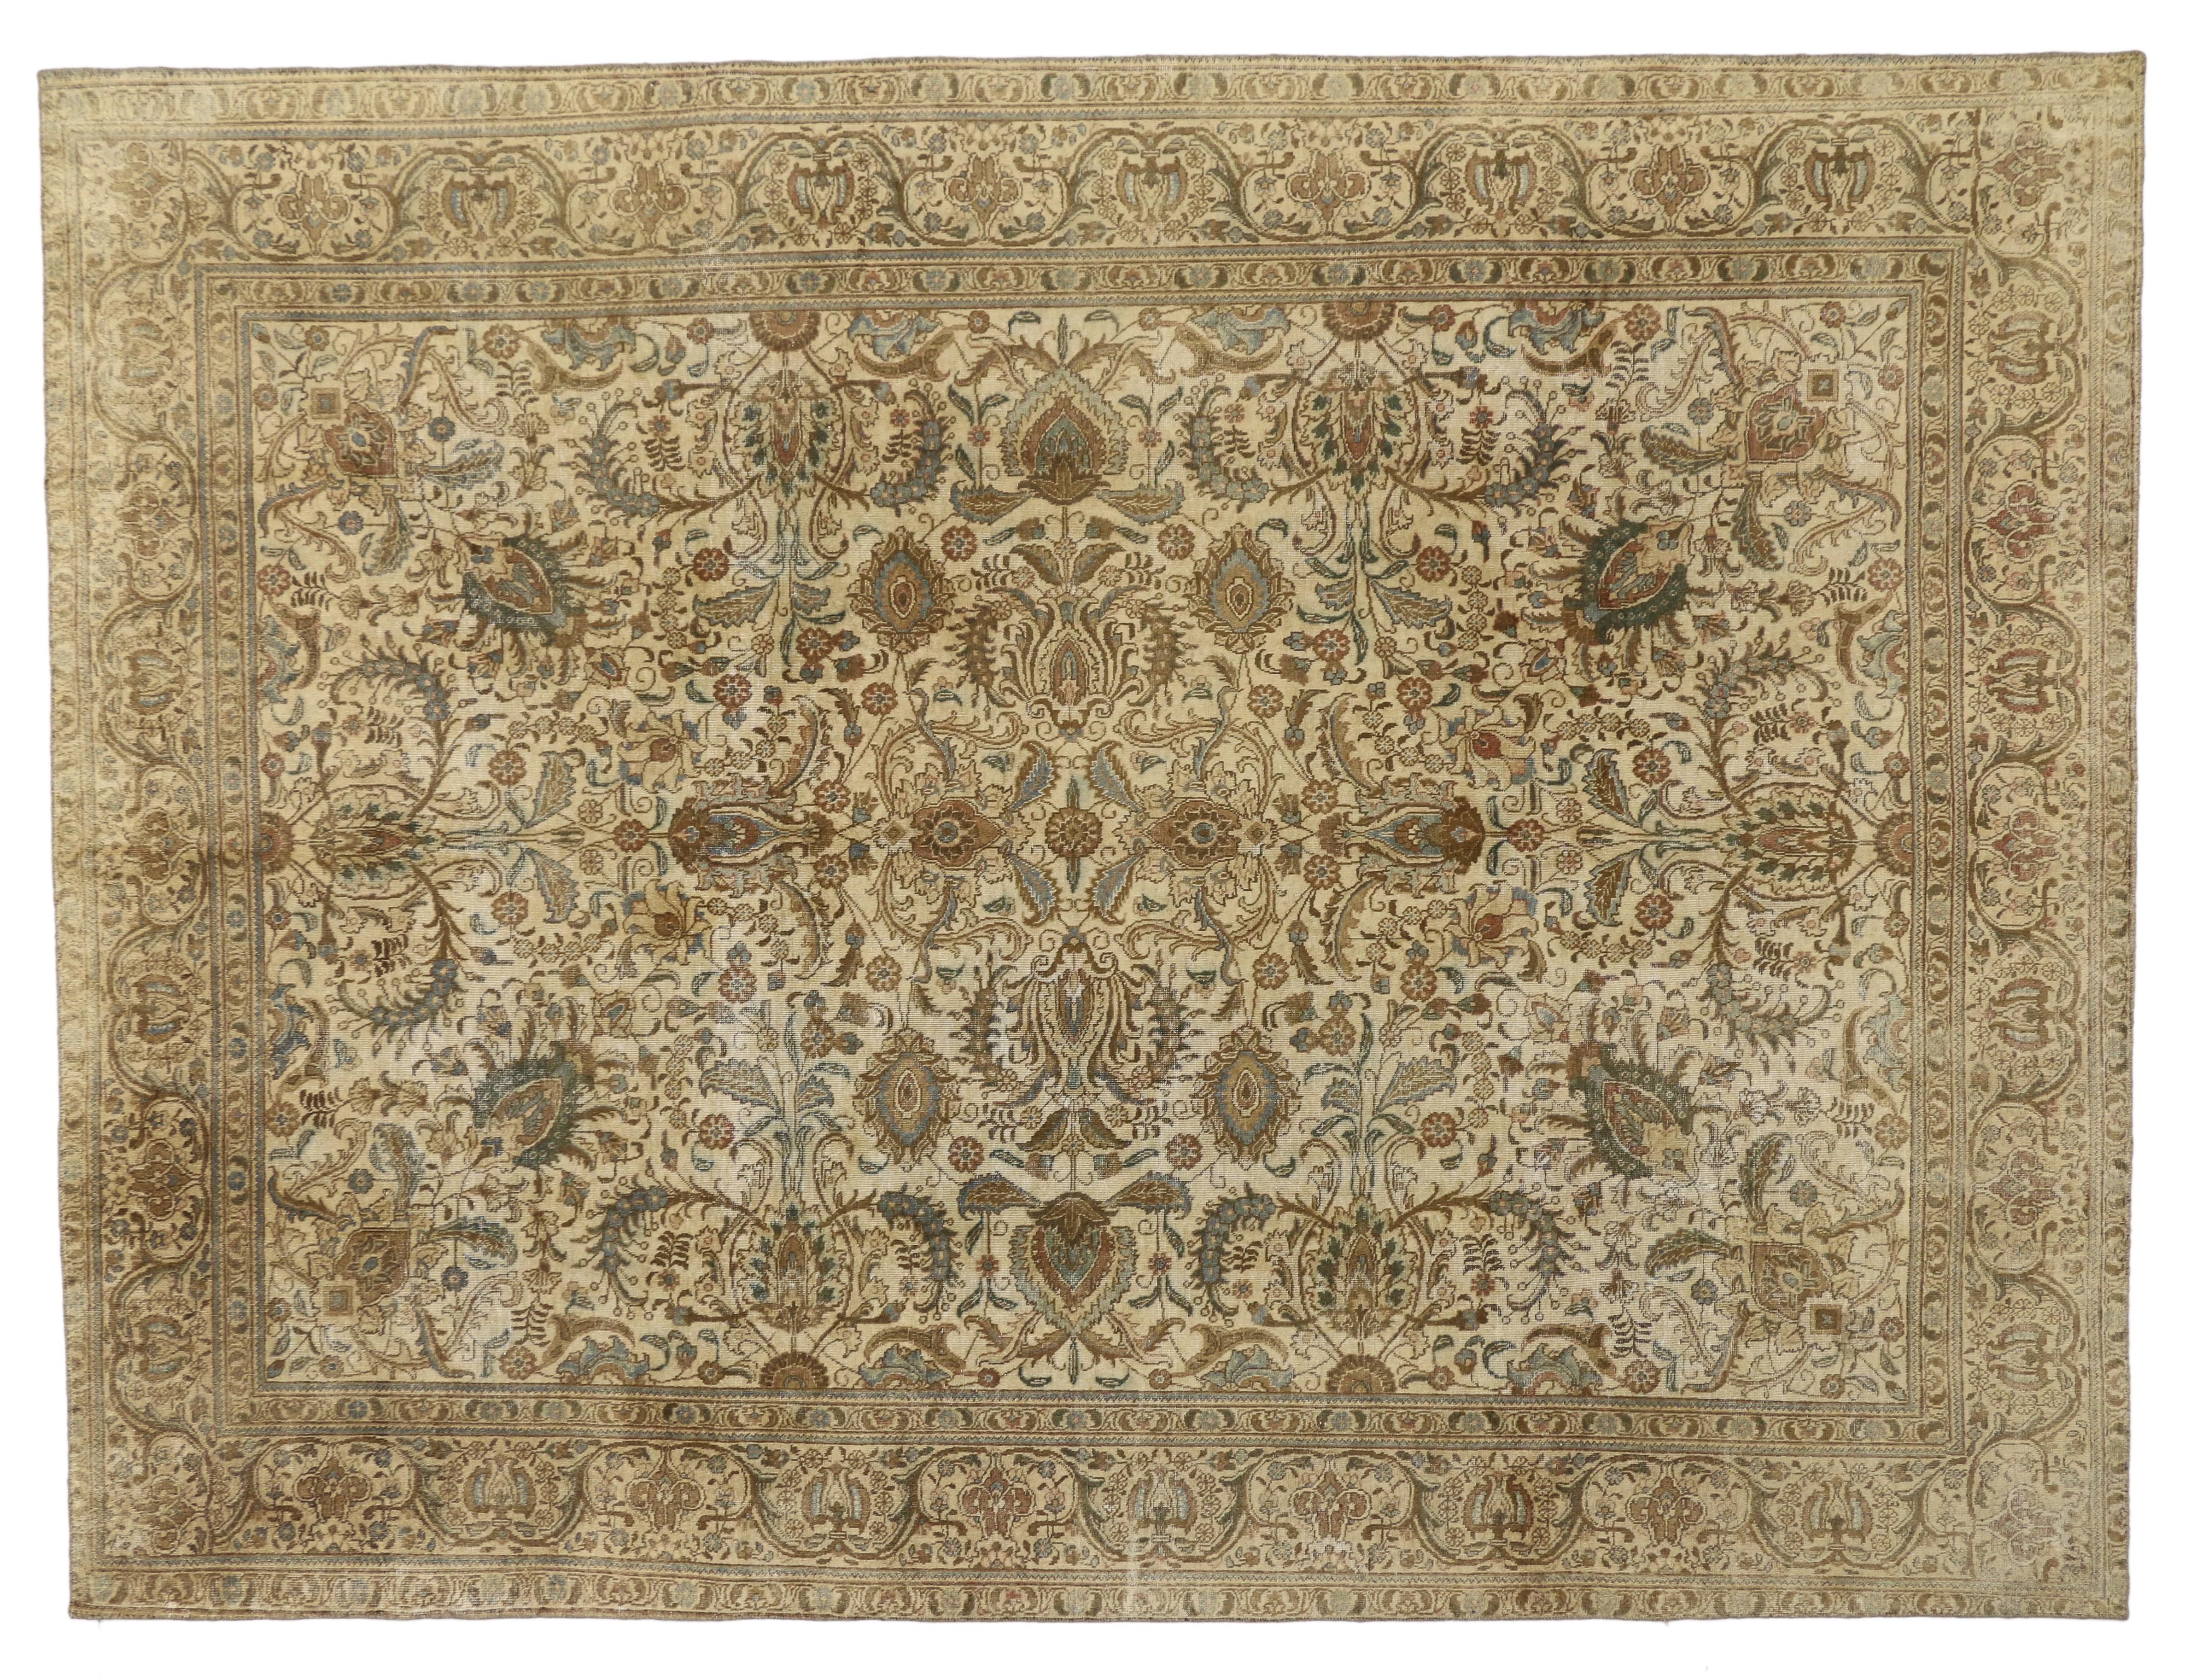 20th Century Distressed Vintage Tabriz Persian Rug with Warm, Neutral Colors